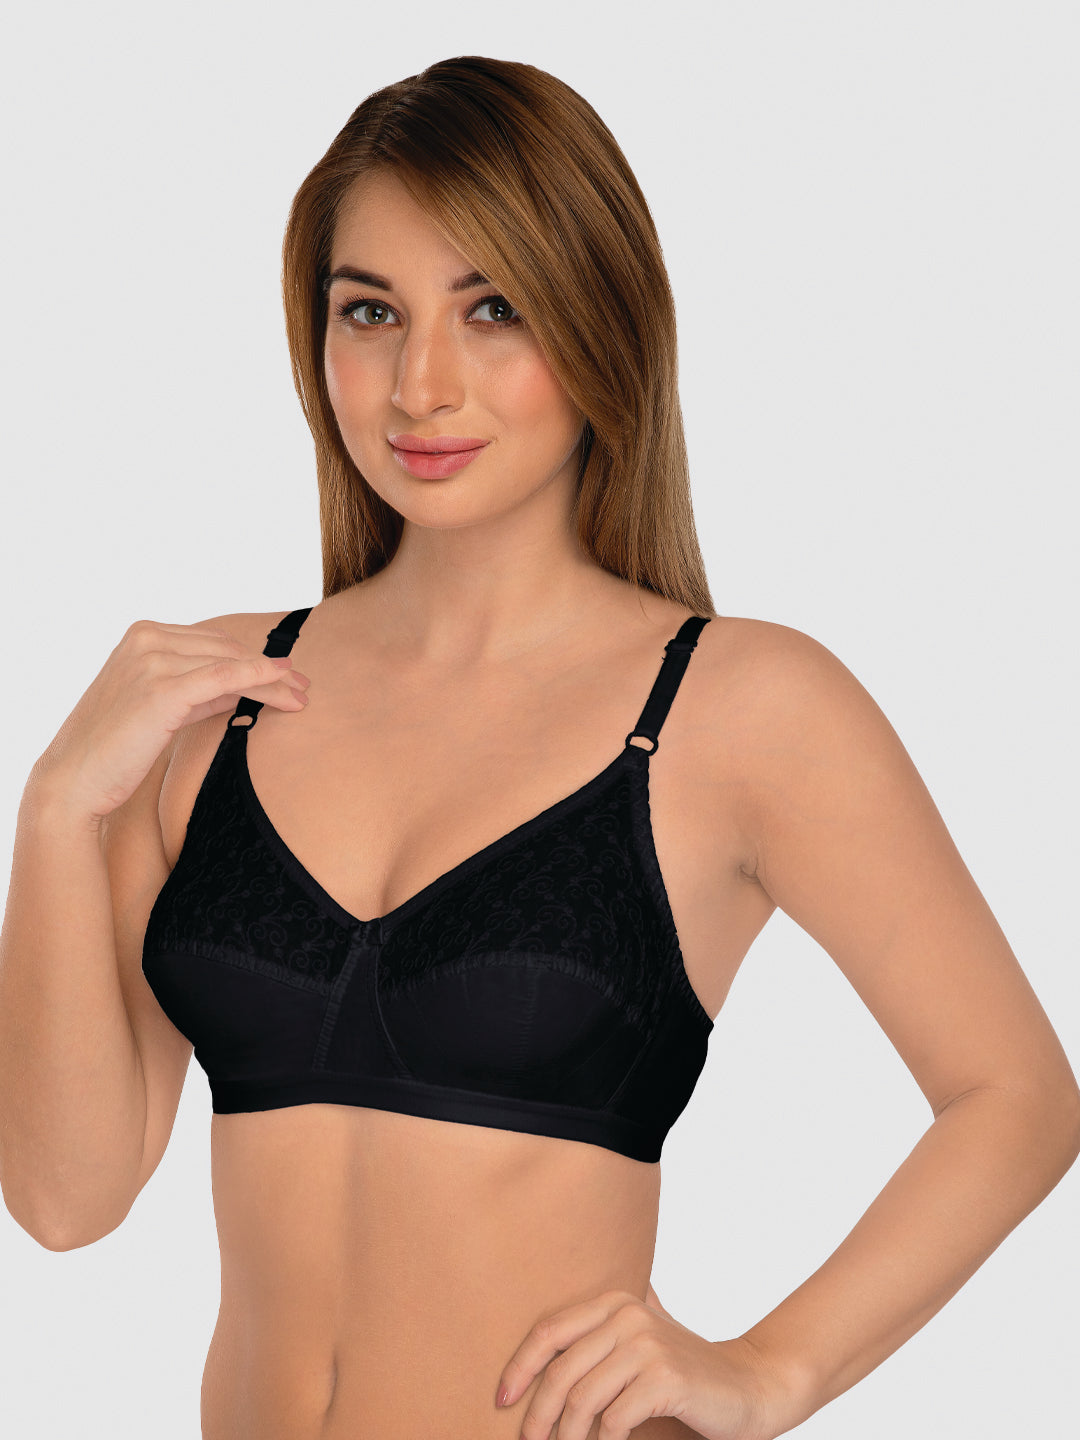 Daisy Dee Black Non Padded Non Wired Full Coverage Bra NILIGNCE-Black